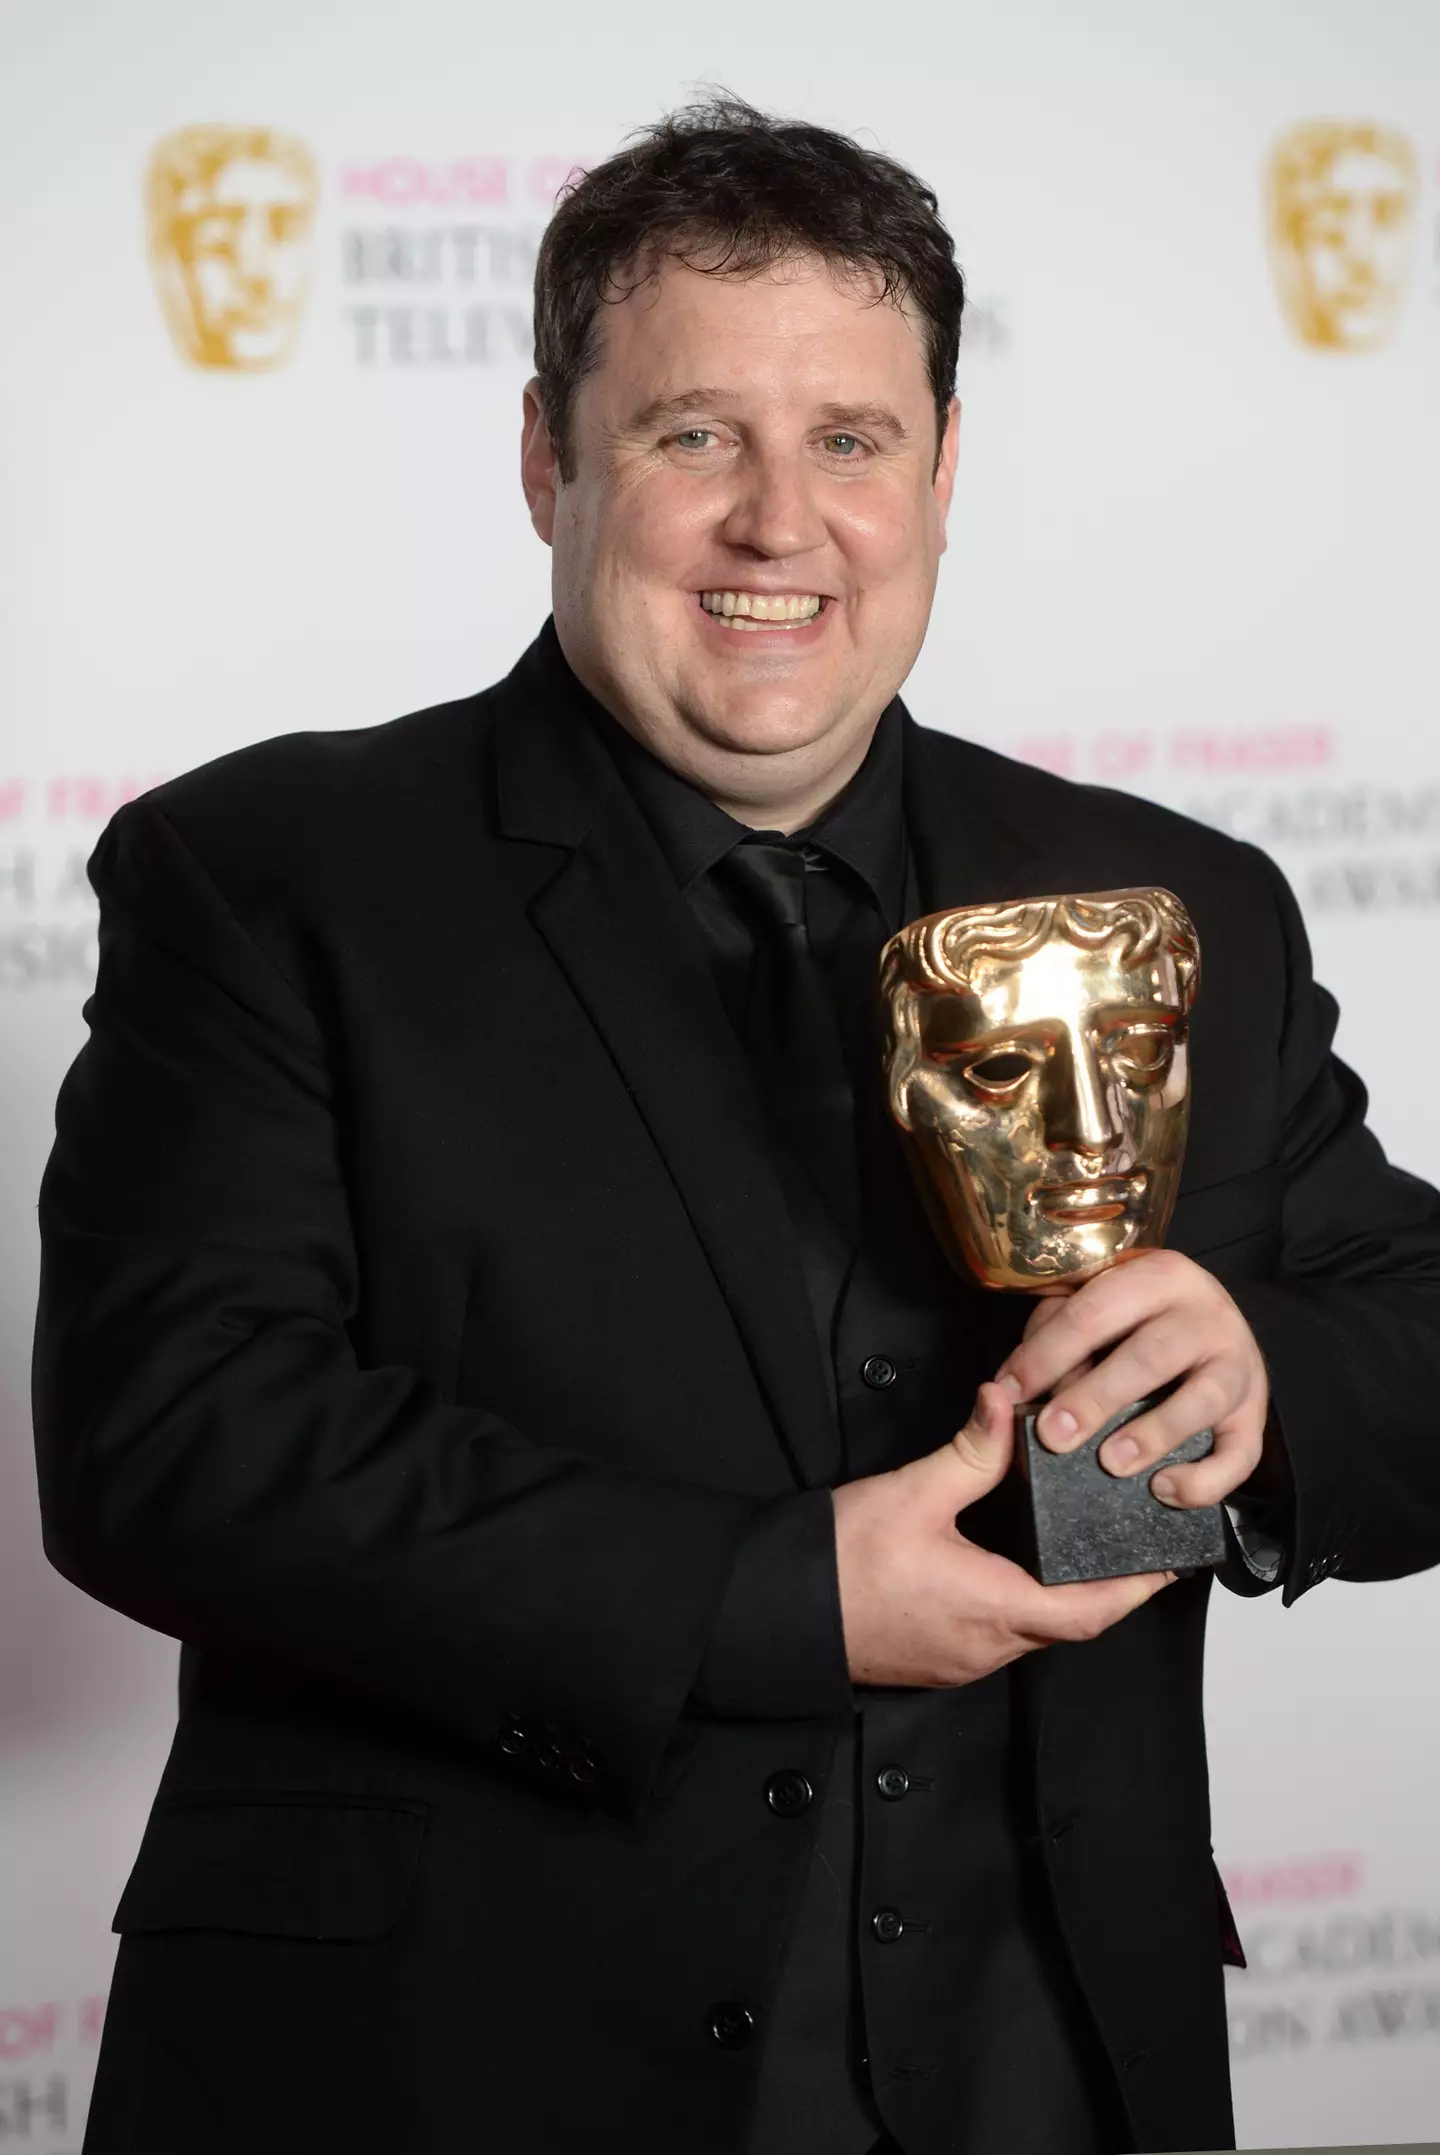 Peter Kay has announced new tour dates up until 2025!